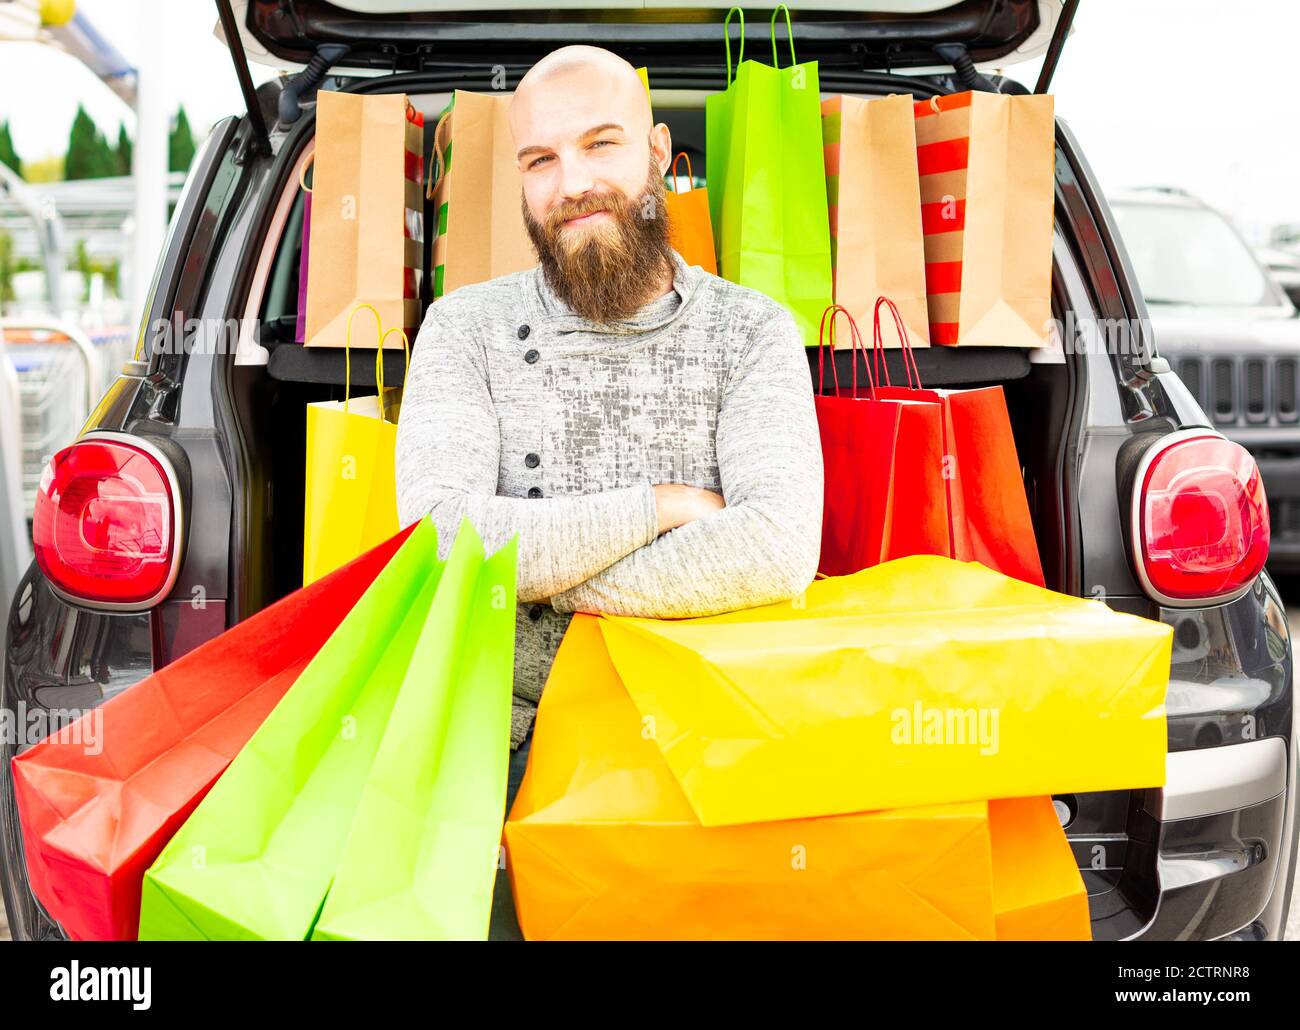 Smiling man having fun with lots of bags on a shopping day for the black friday. Concept about how fun is to buy things on these promotional days. Stock Photo